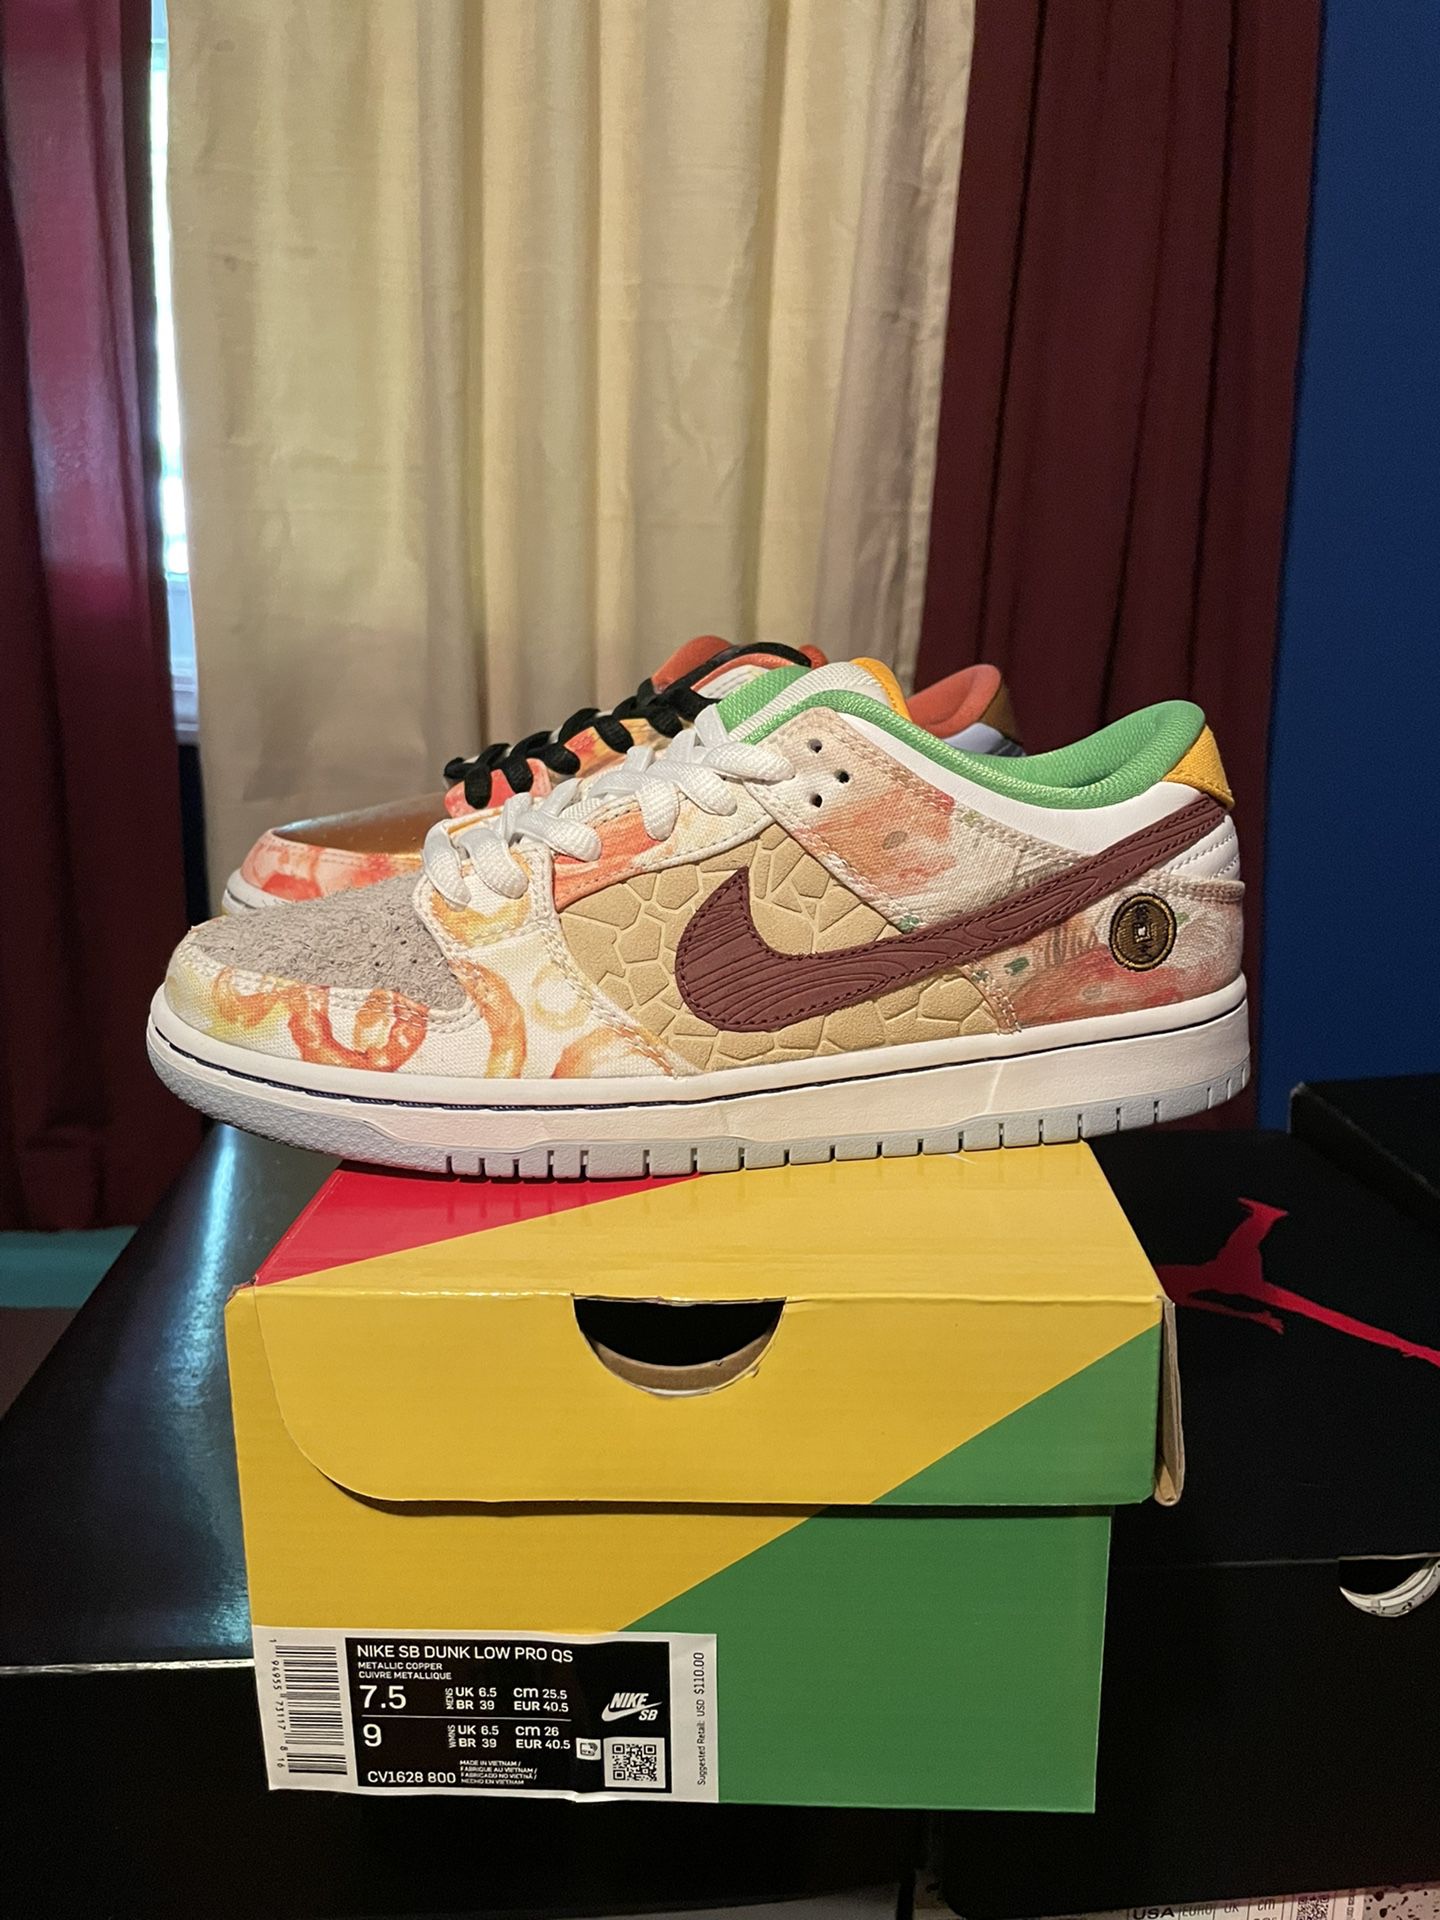 Ds Nike SB Dunk Low Street Hawker Size 7.5 for Sale in St. Charles